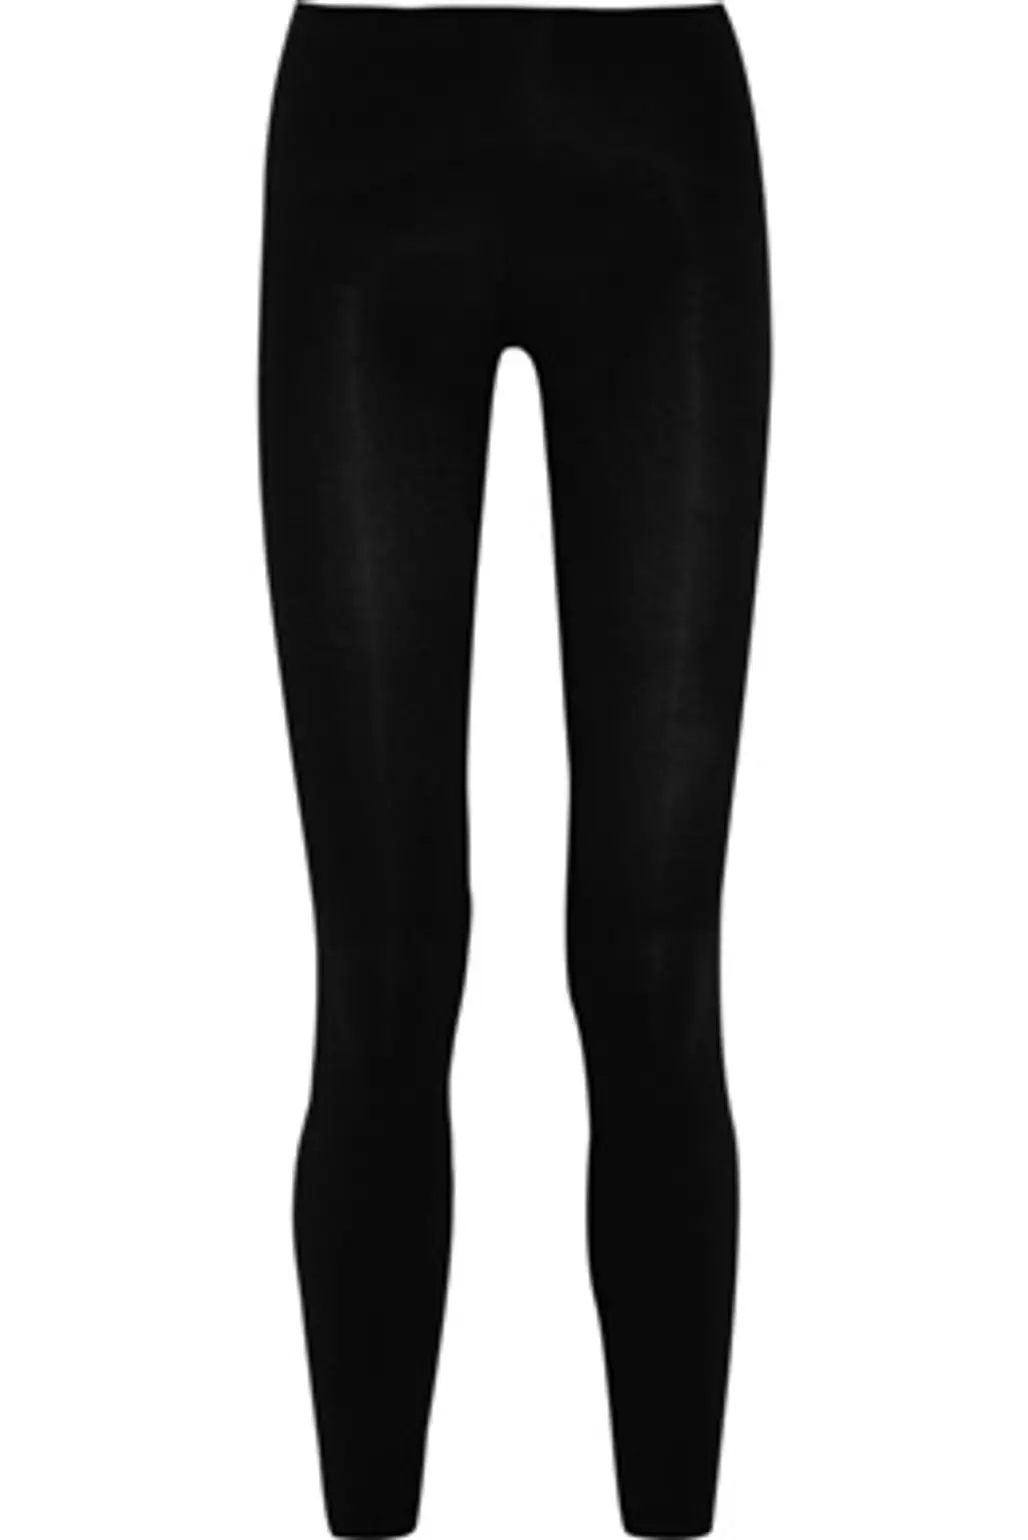 Spanx Look-at-Me Stretch Cotton-Blend Leggings